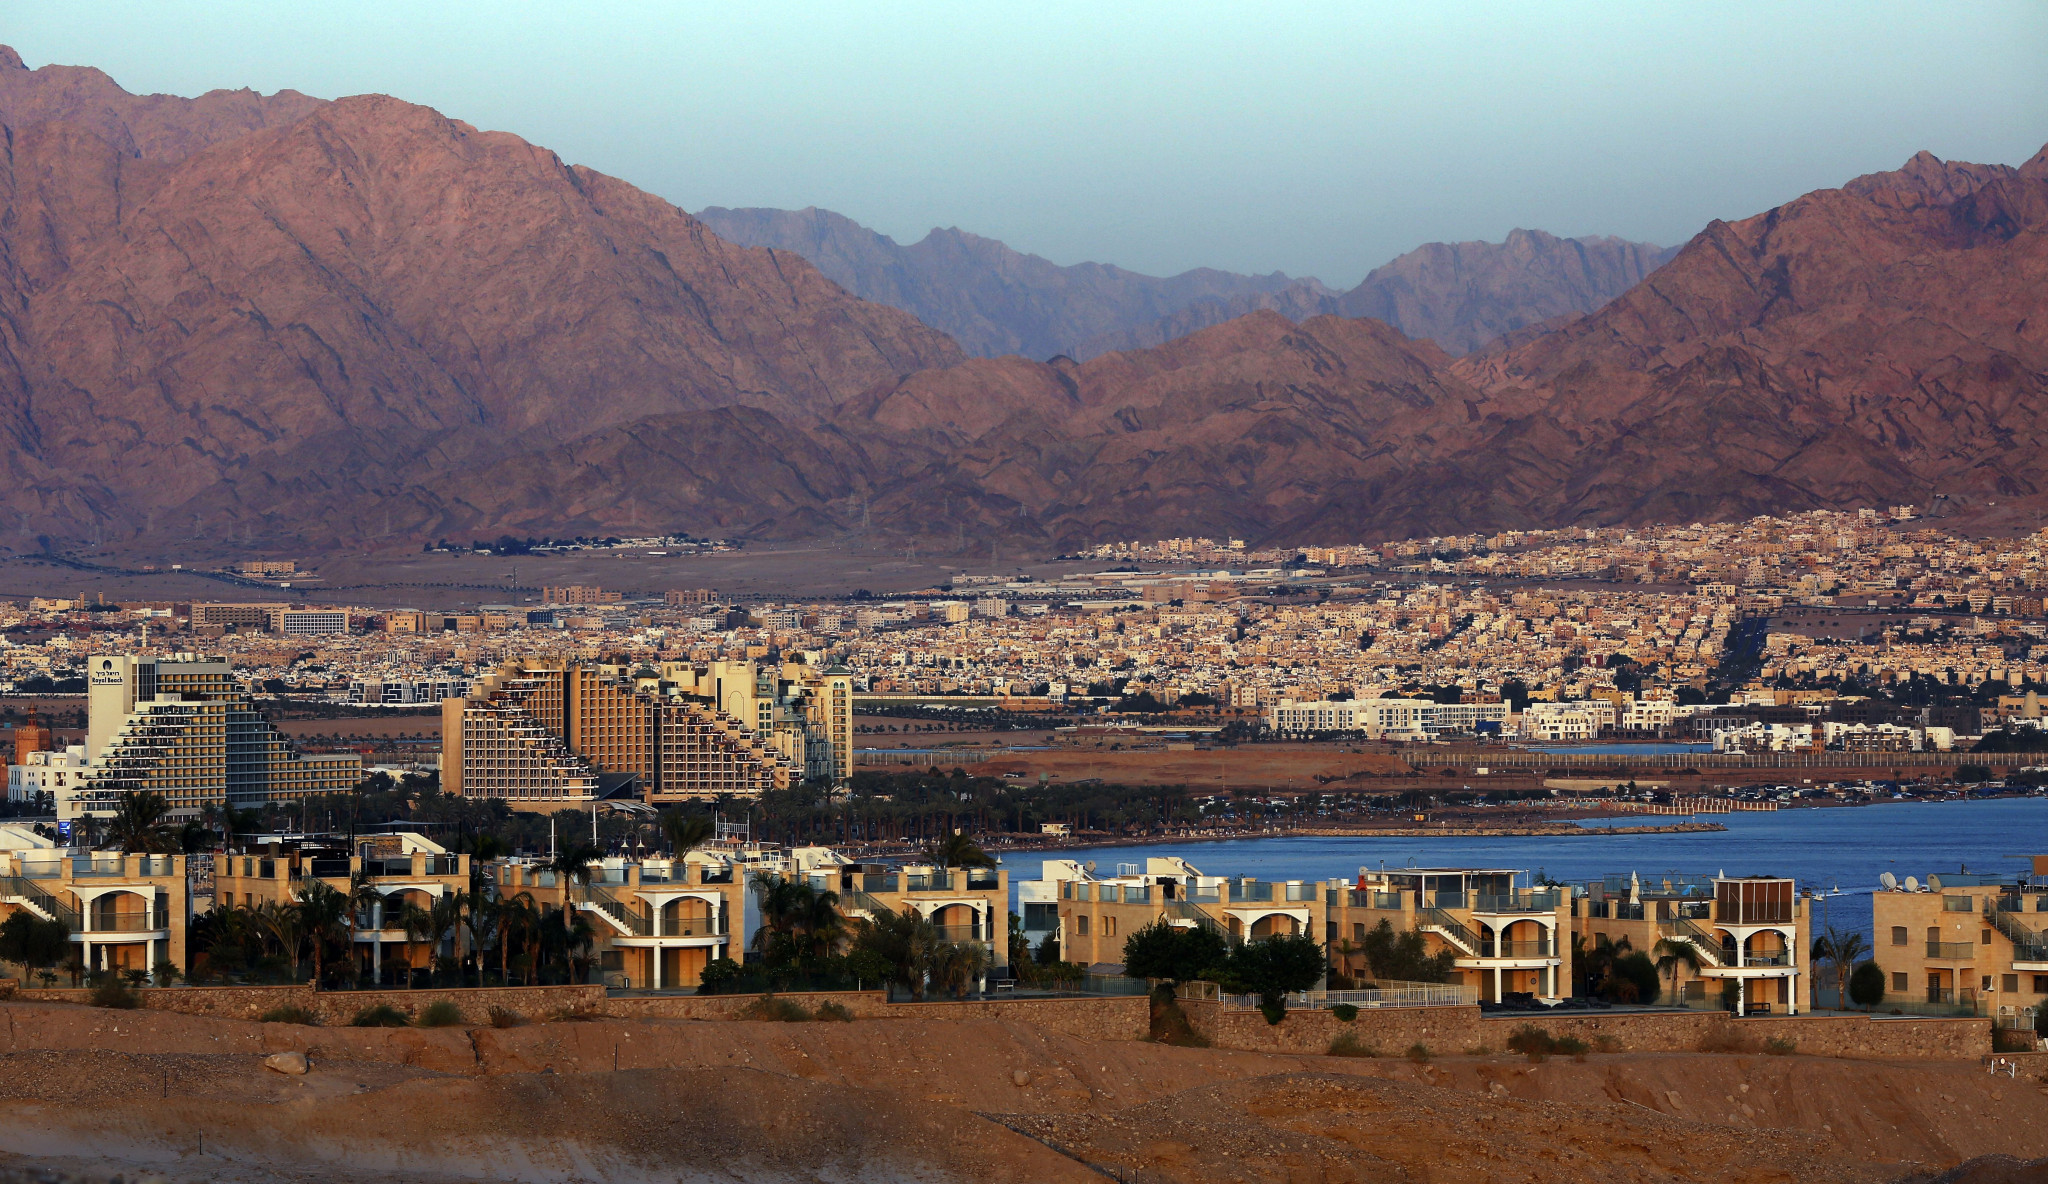 The event took place in the Red Sea city of Eilat, which is over the water from Aqaba in Jordan ©Getty Images